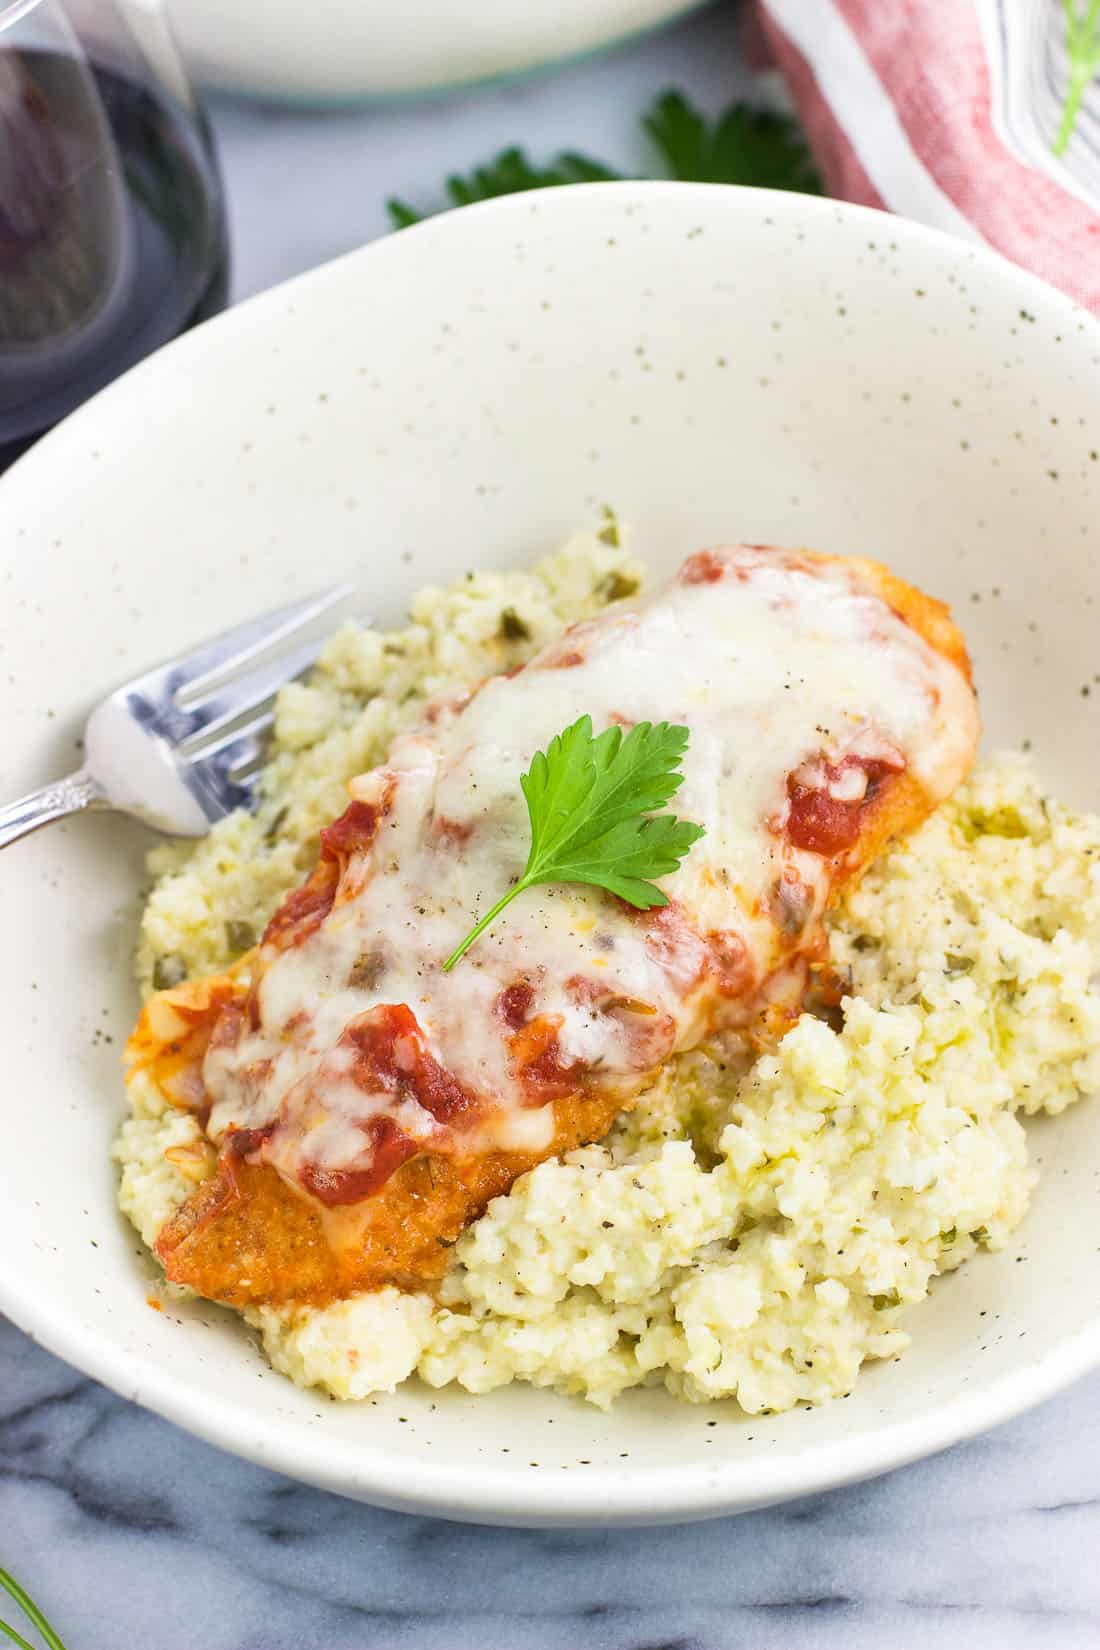 A breaded chicken cutlet covered in marinara sauce and cheese served over grits in a shallow bowl with a fork